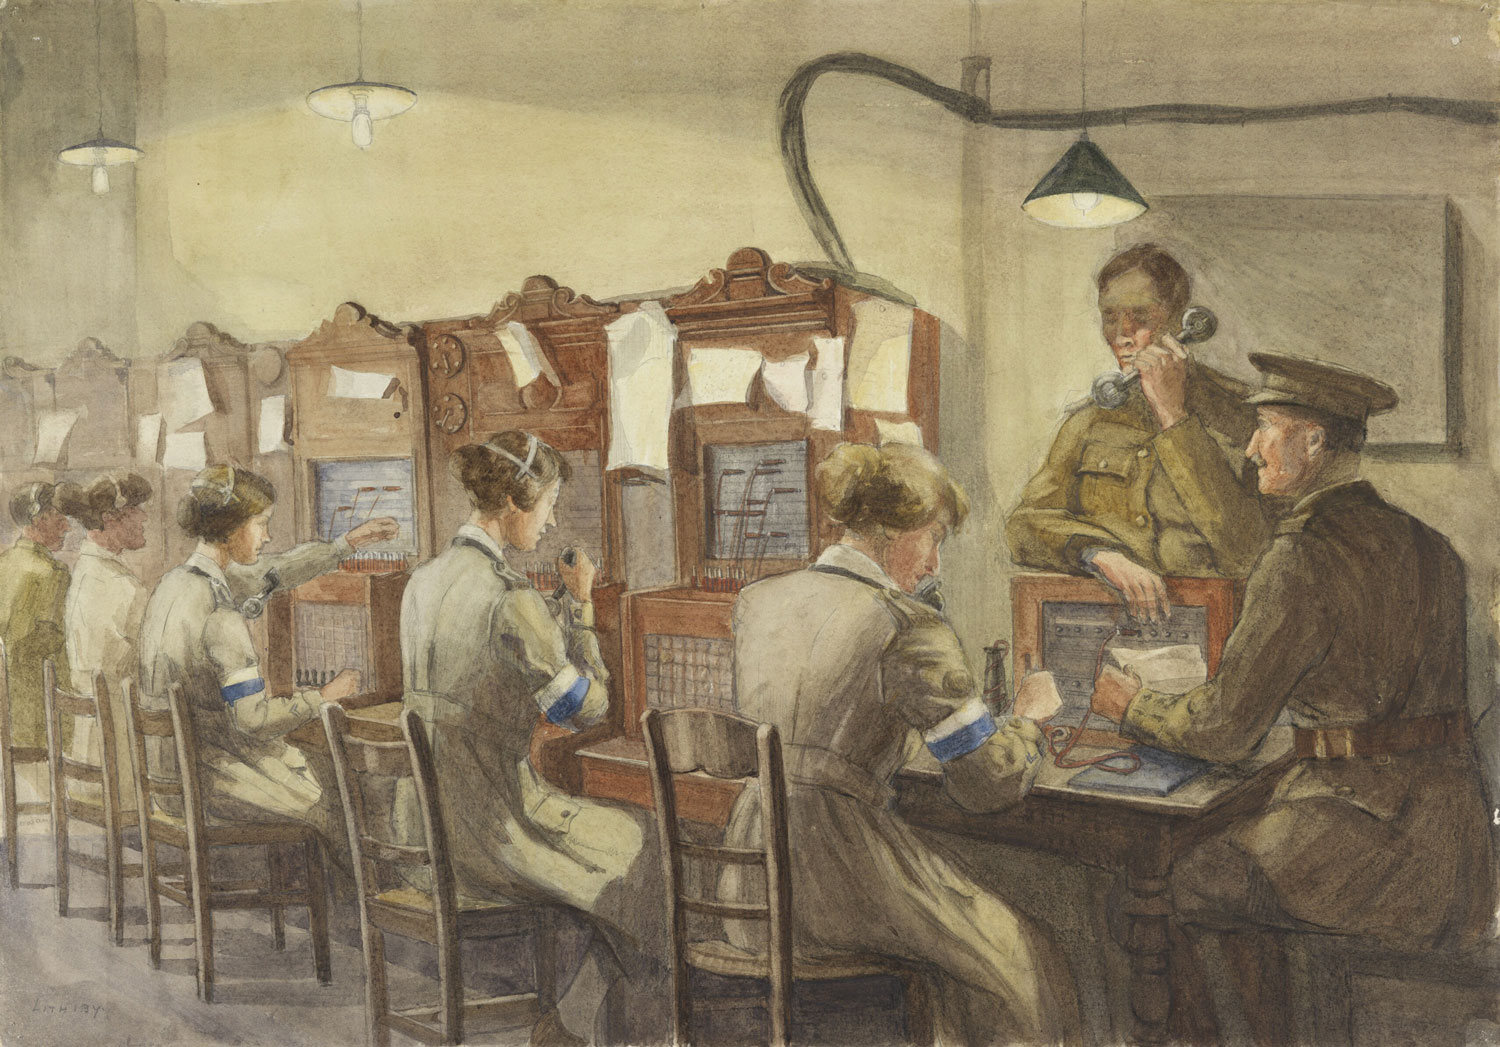 Queen Mary’s Army Auxiliary Corps Signallers, Base Hill, Rouen : Telephones. Forewoman Milnes and Captain Pope. Art.IWM ART 2900. Copyright IWM.